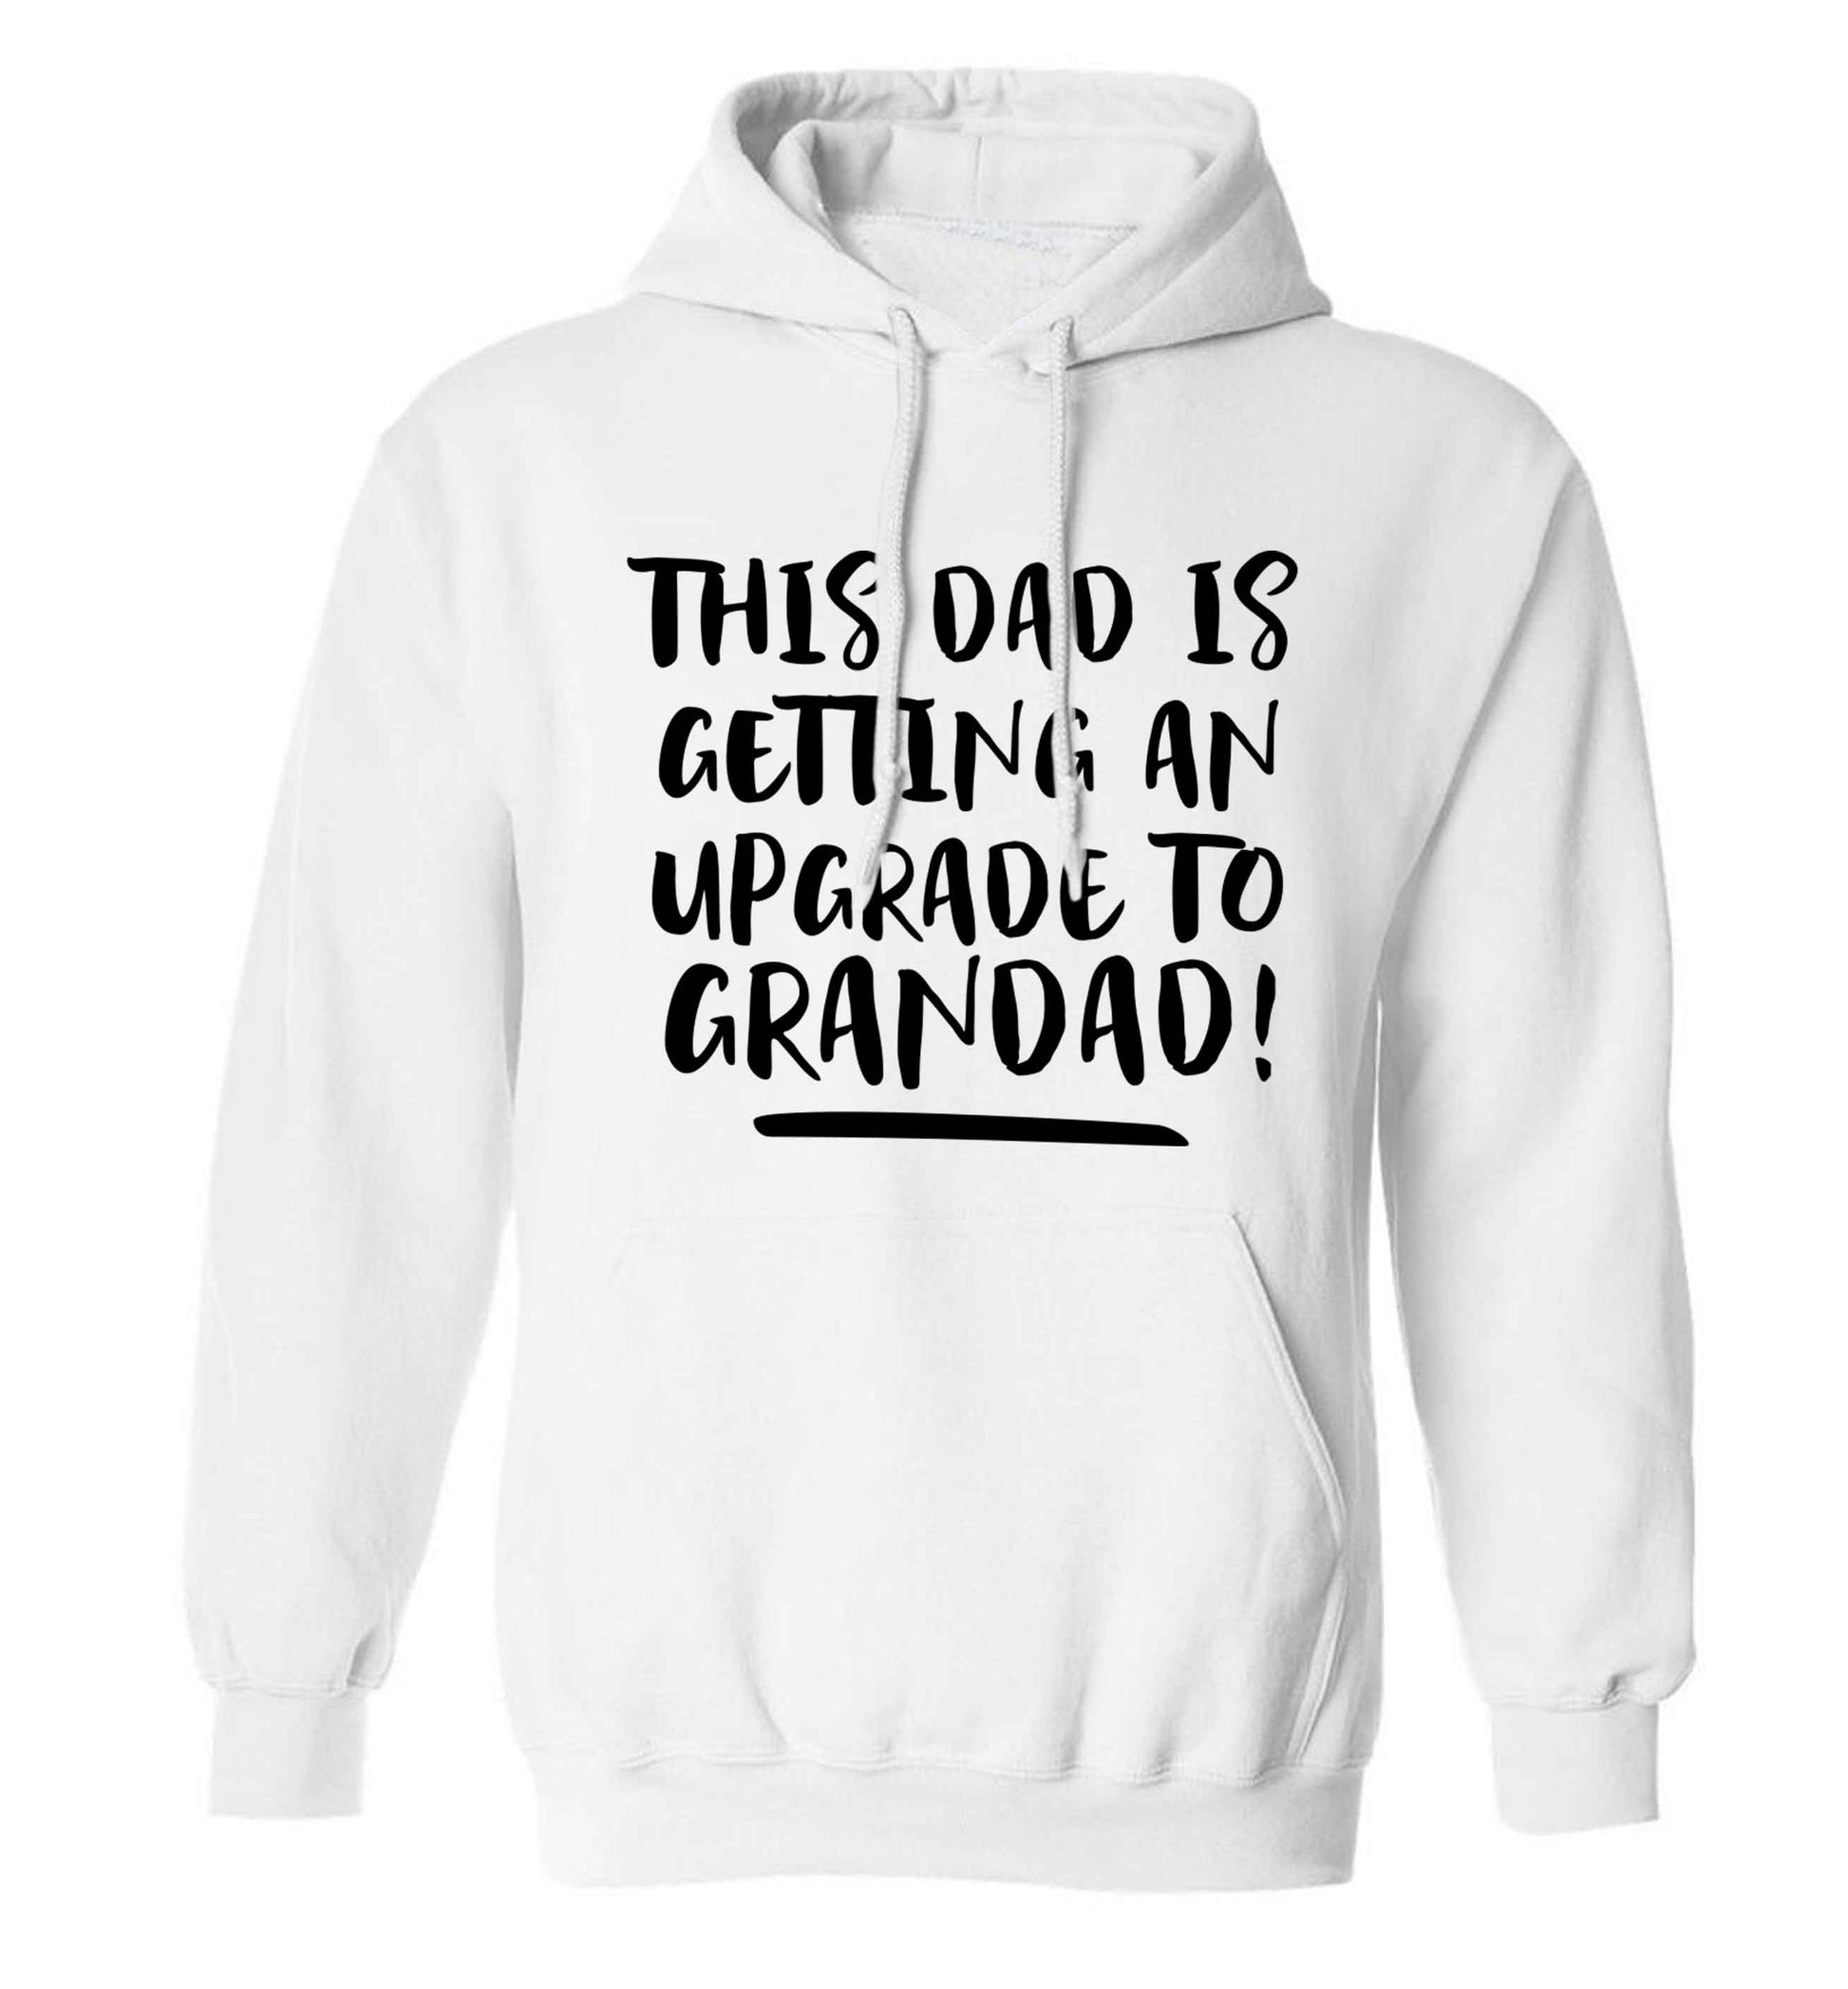 This dad is getting an upgrade to grandad! adults unisex white hoodie 2XL